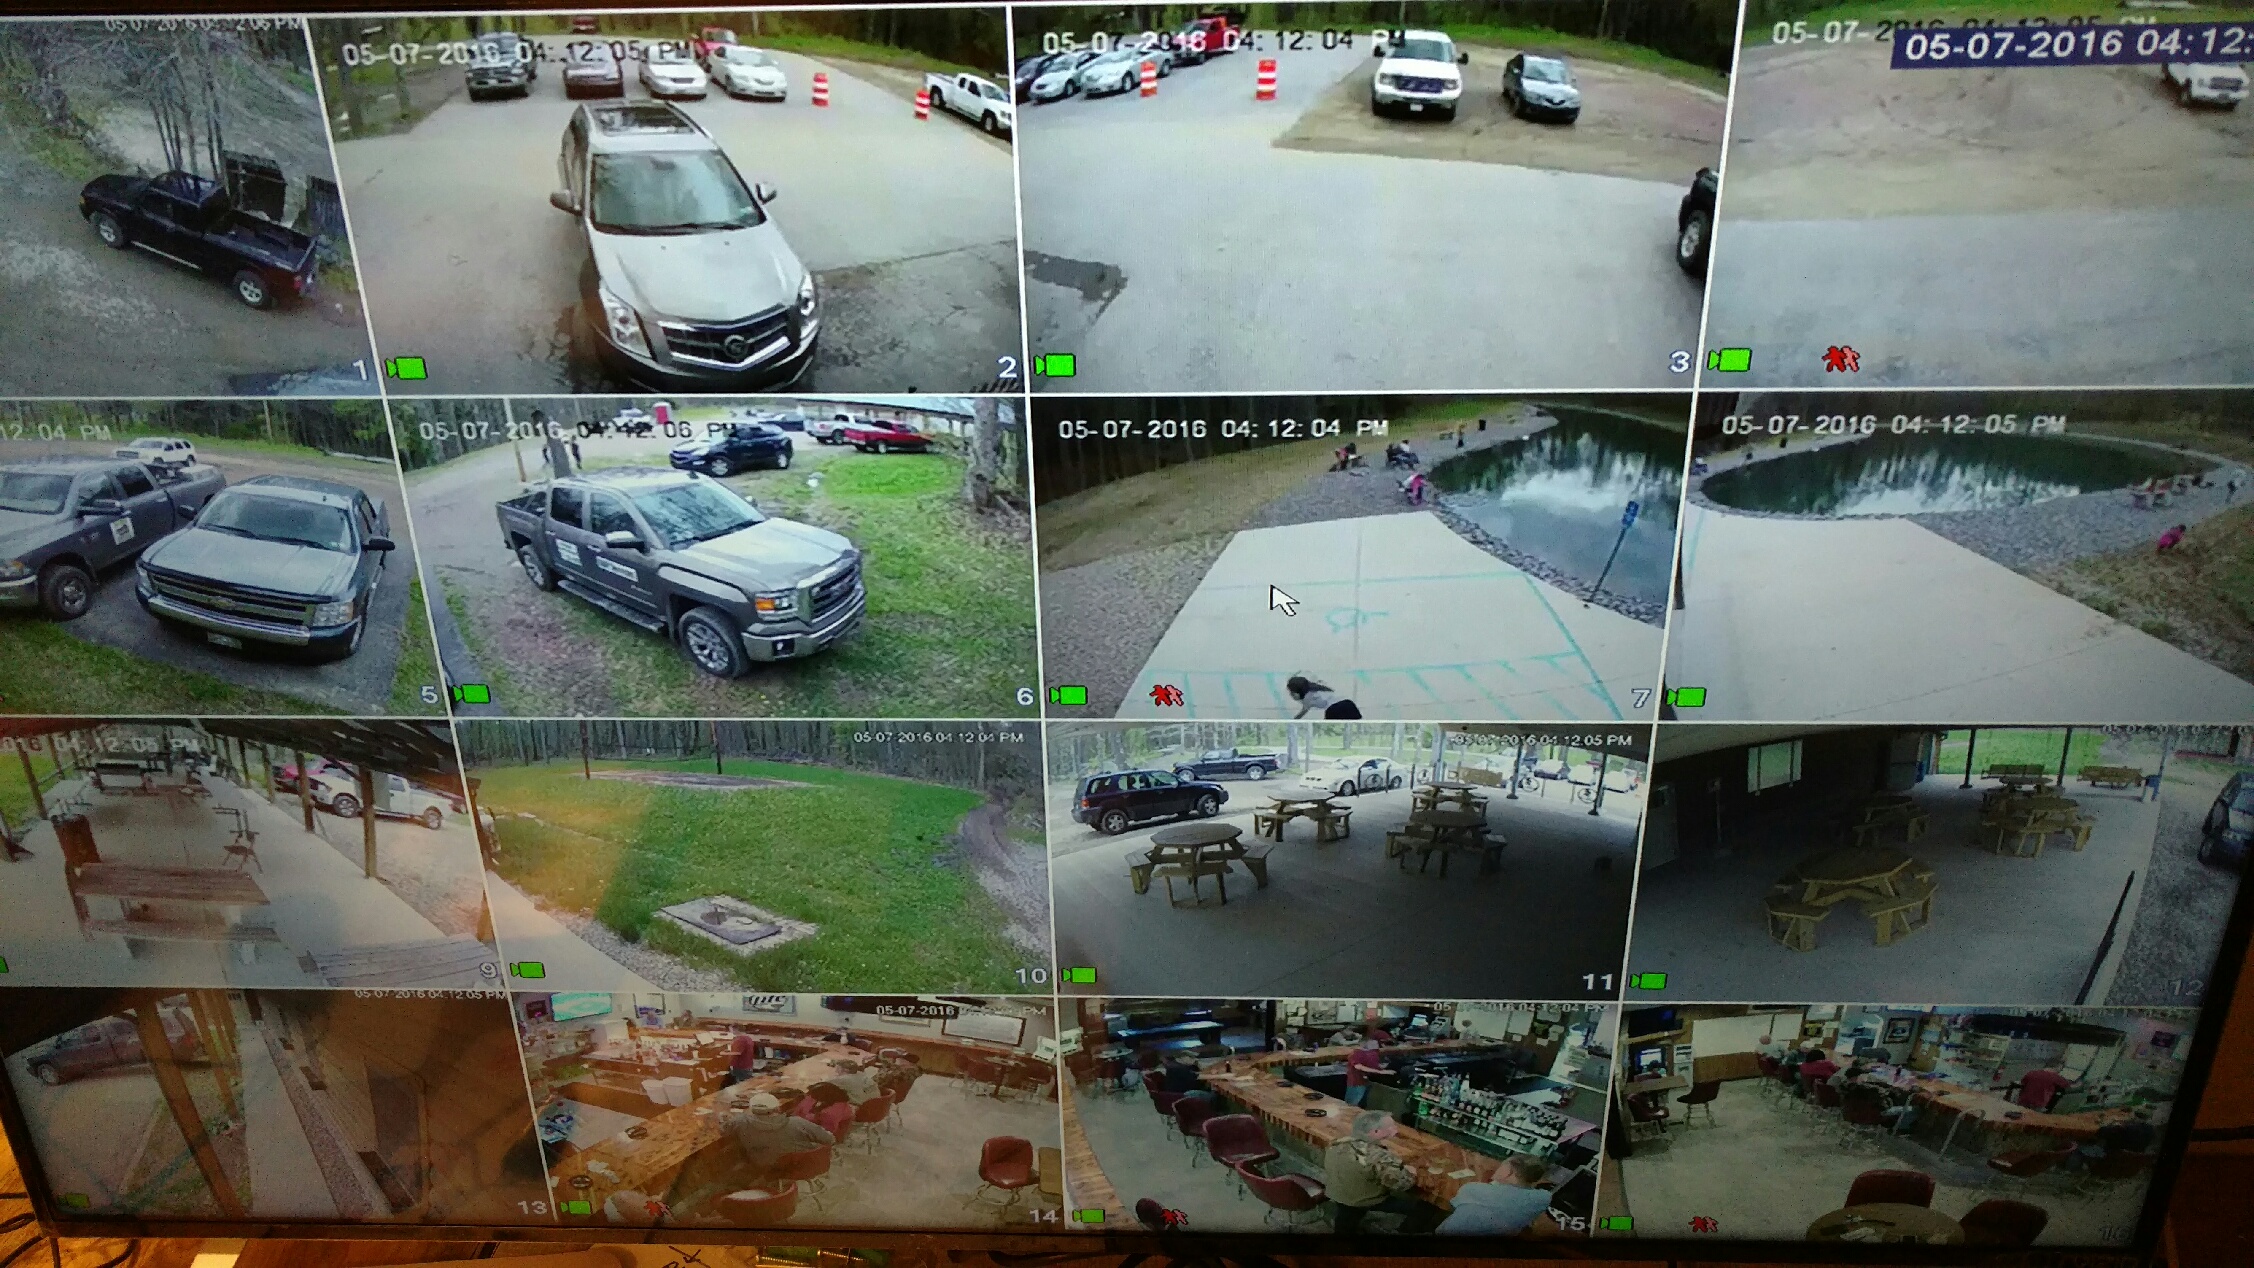 Industry Solutions - Commercial Security Camera - Myrtle Beach, SC